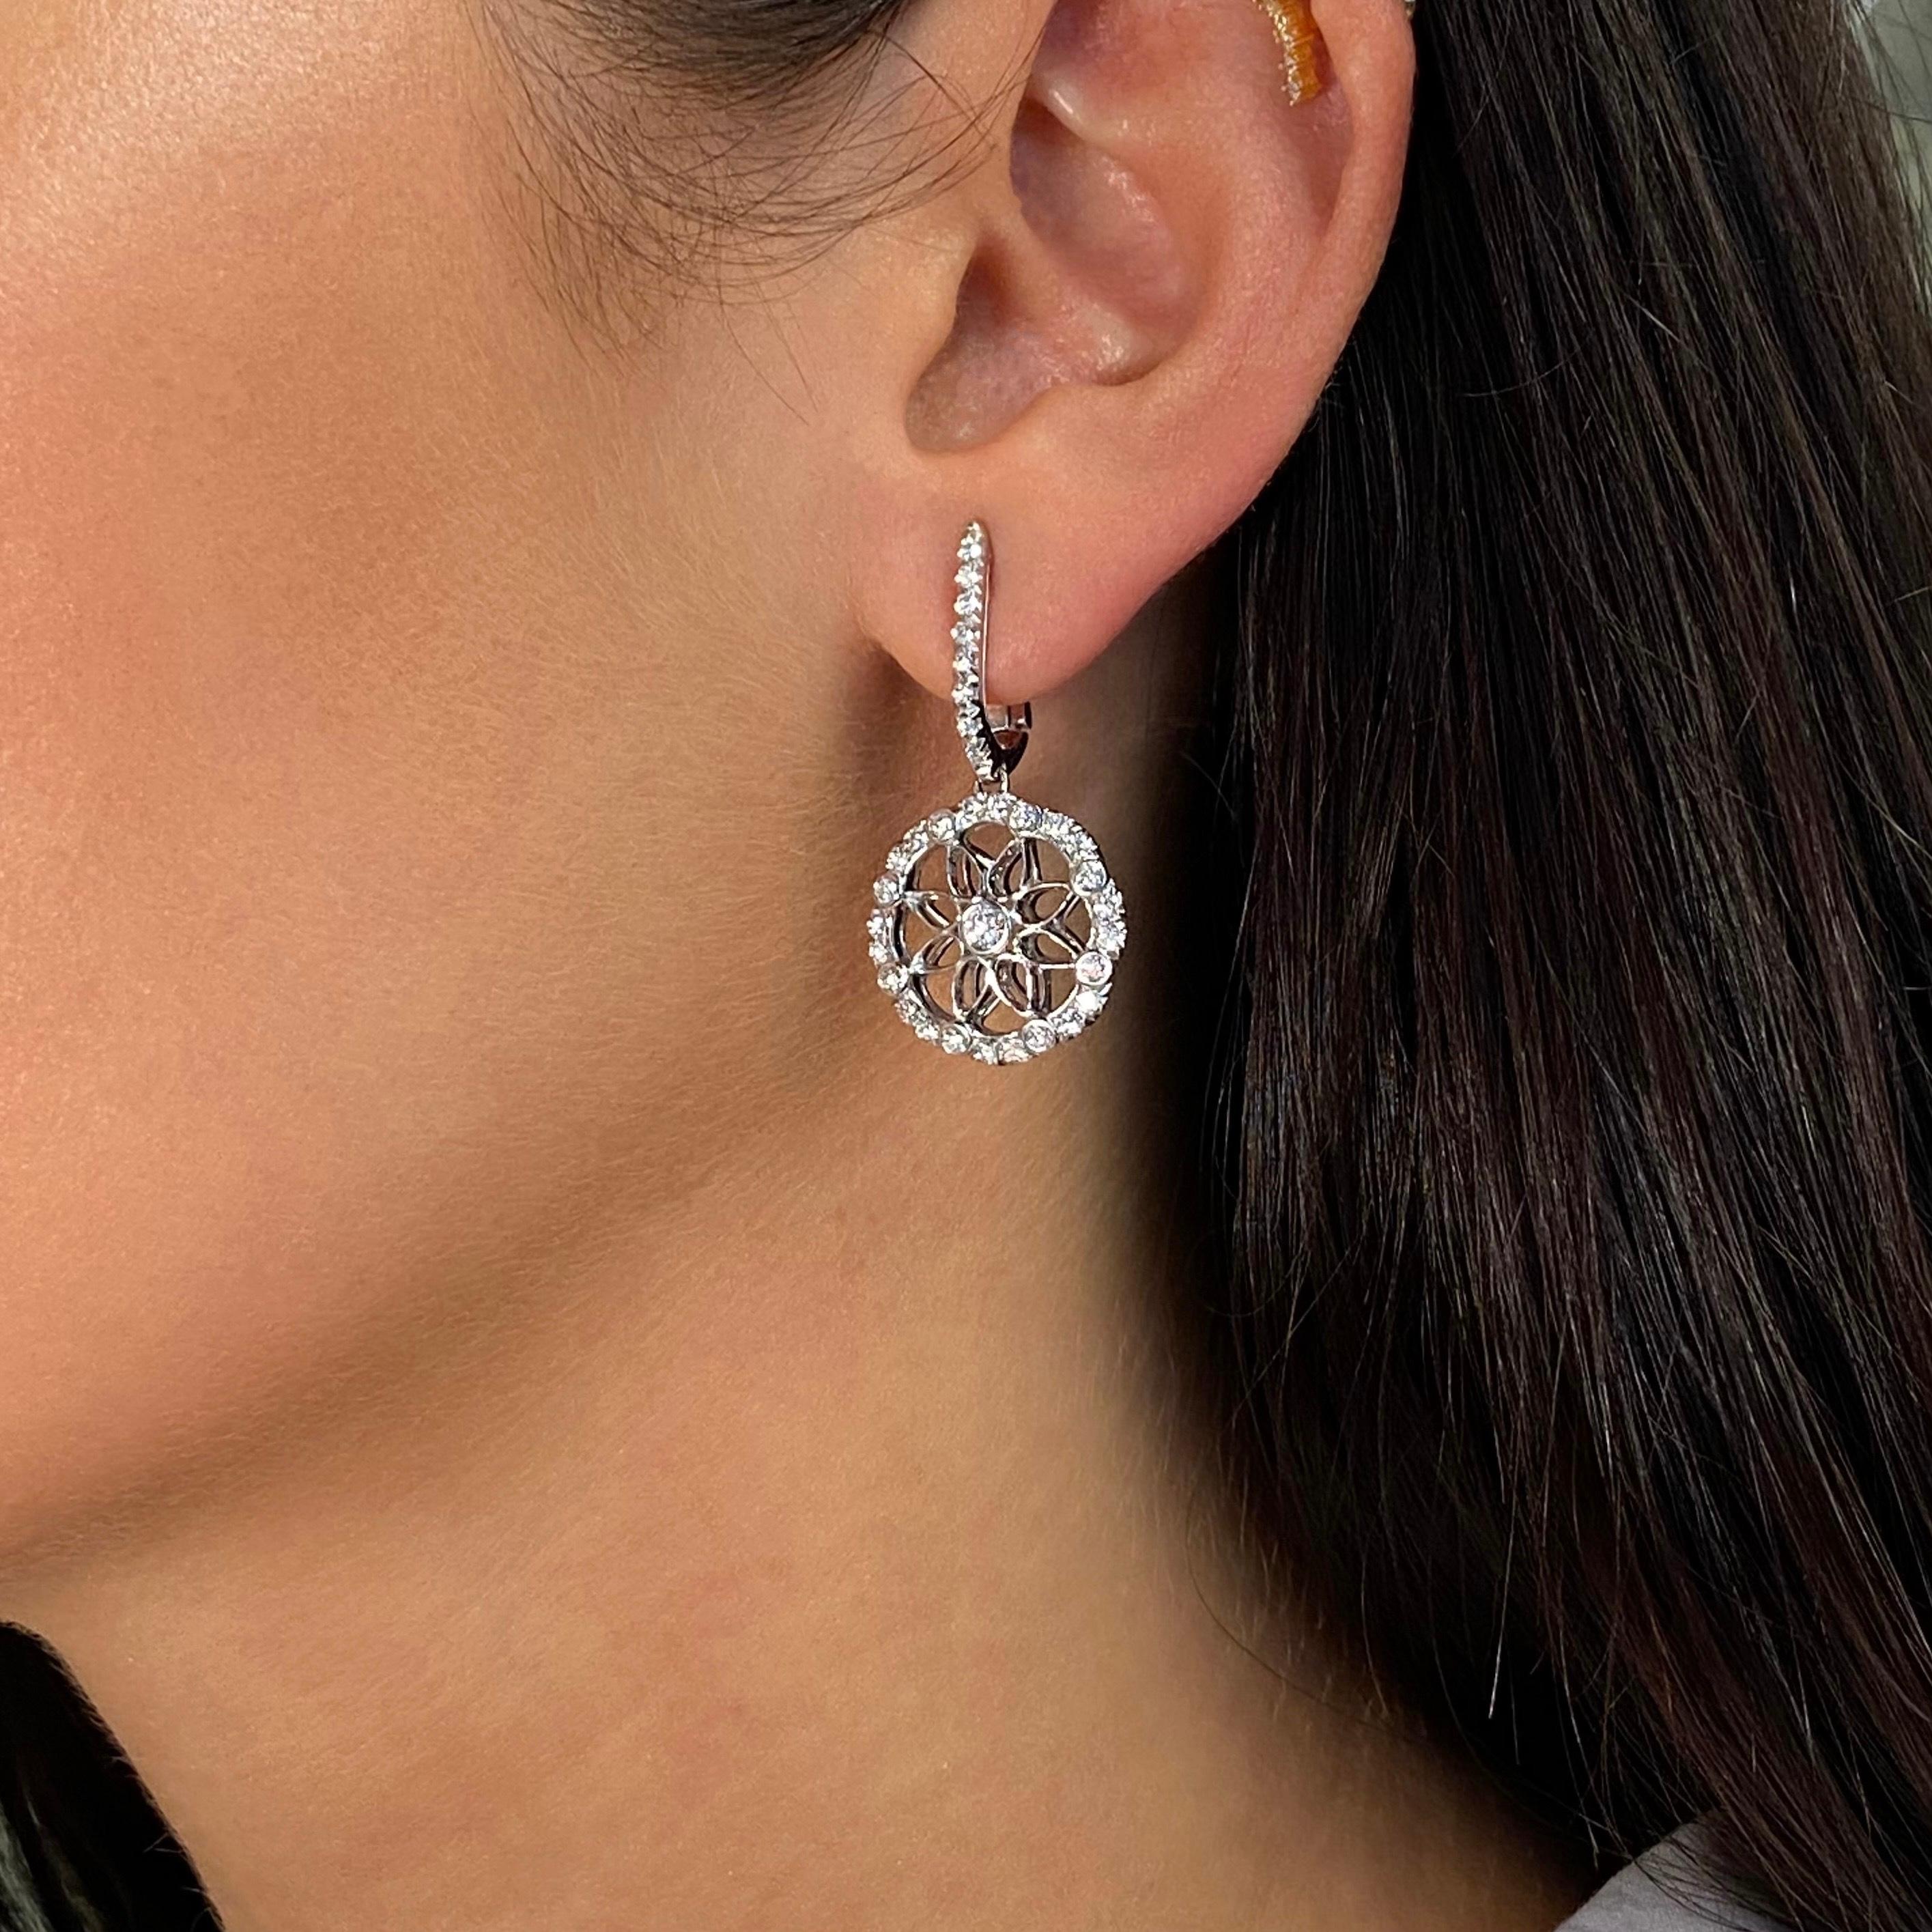 These magnificent diamond medium drop earrings with their lavish diamond detail create a look that will make you feel truly luxurious and elegant. Presented in fine 18K white gold. Showcasing a set of 2.66cttw of round cut diamonds. Diamond color G